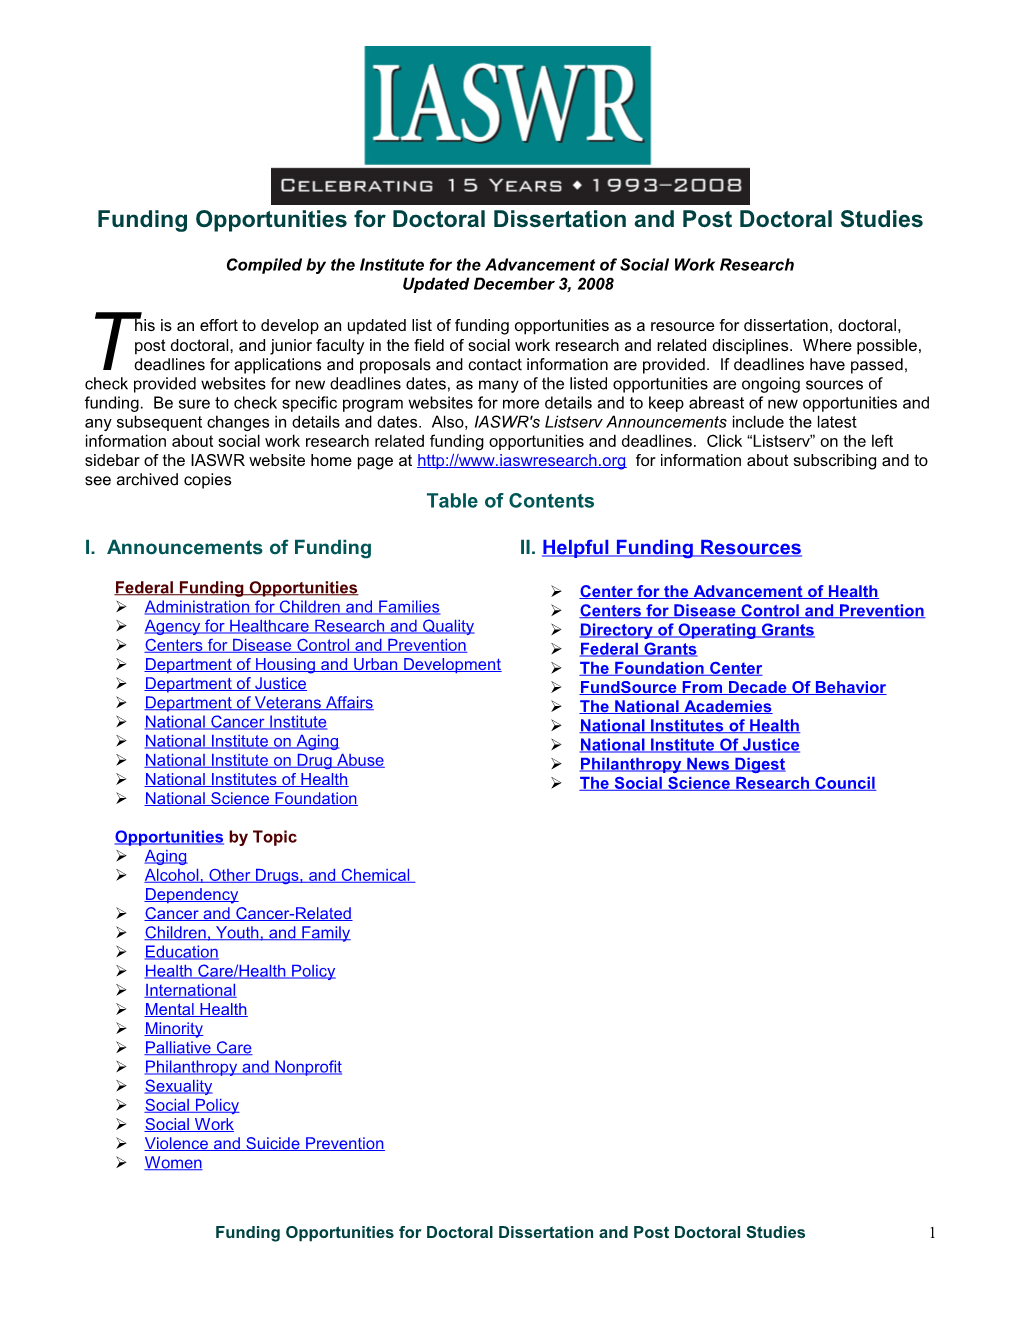 Funding Opportunities for Doctoral Dissertationand Post Doctoral Studies